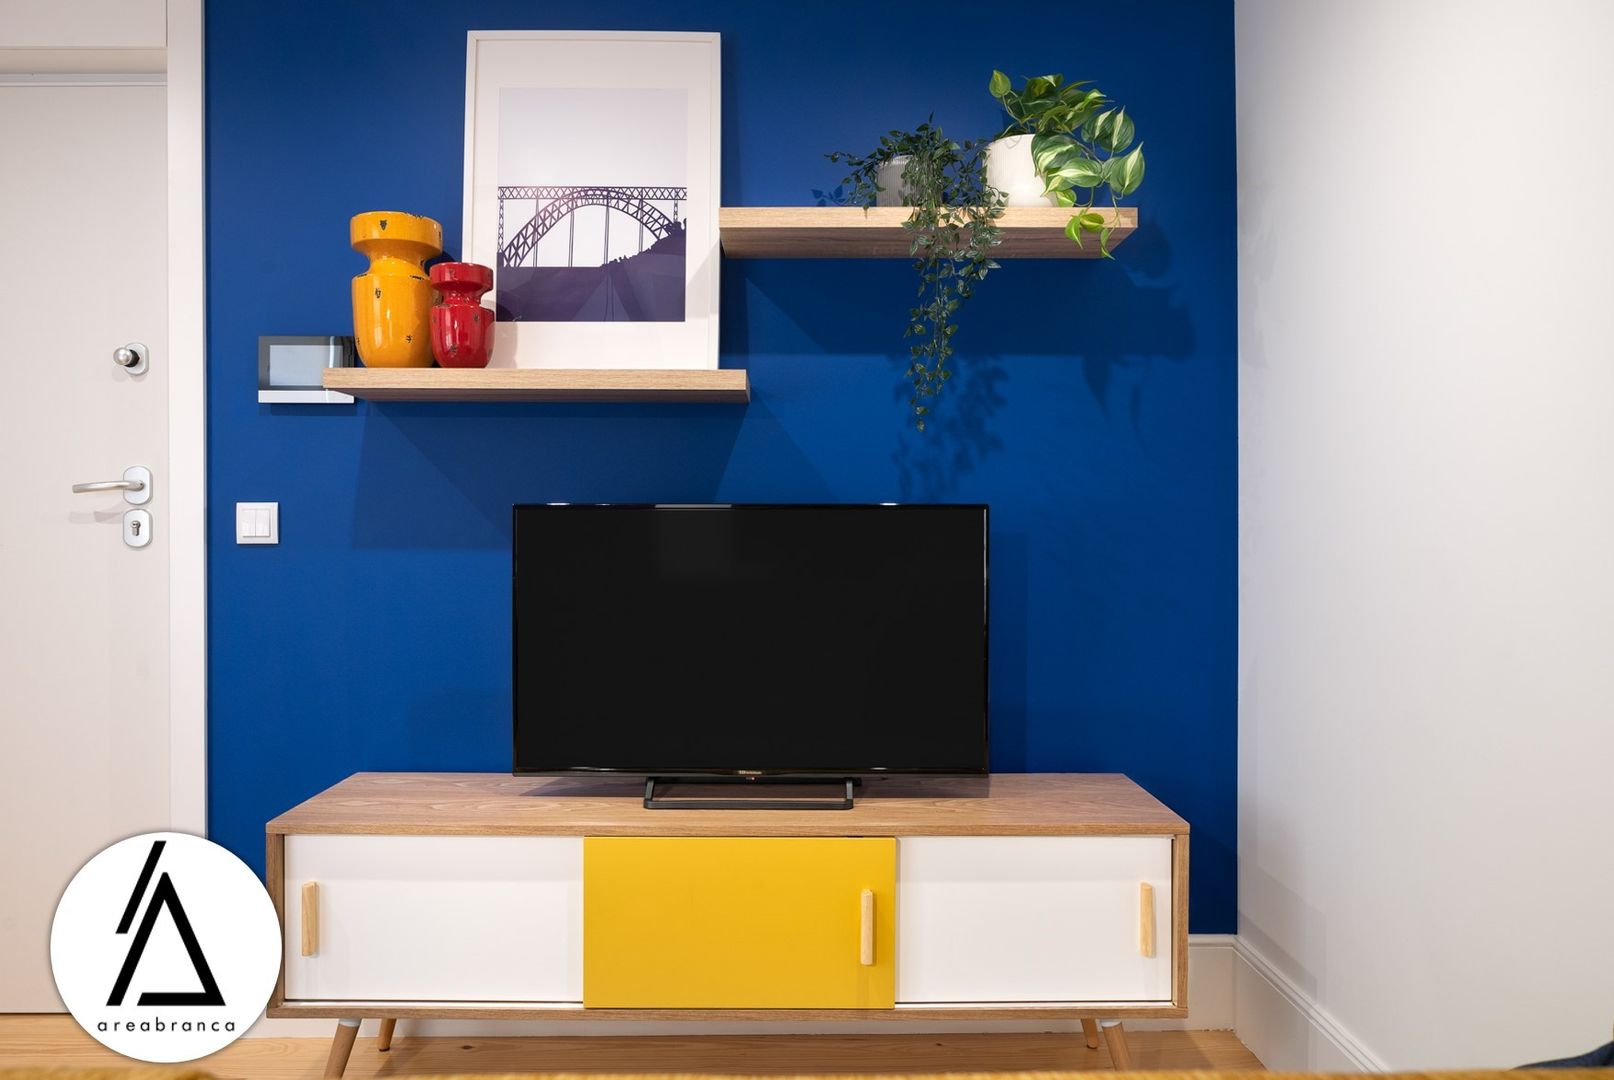 Apartamento 1 ON, Areabranca Areabranca Mediterranean style living room TV stands & cabinets